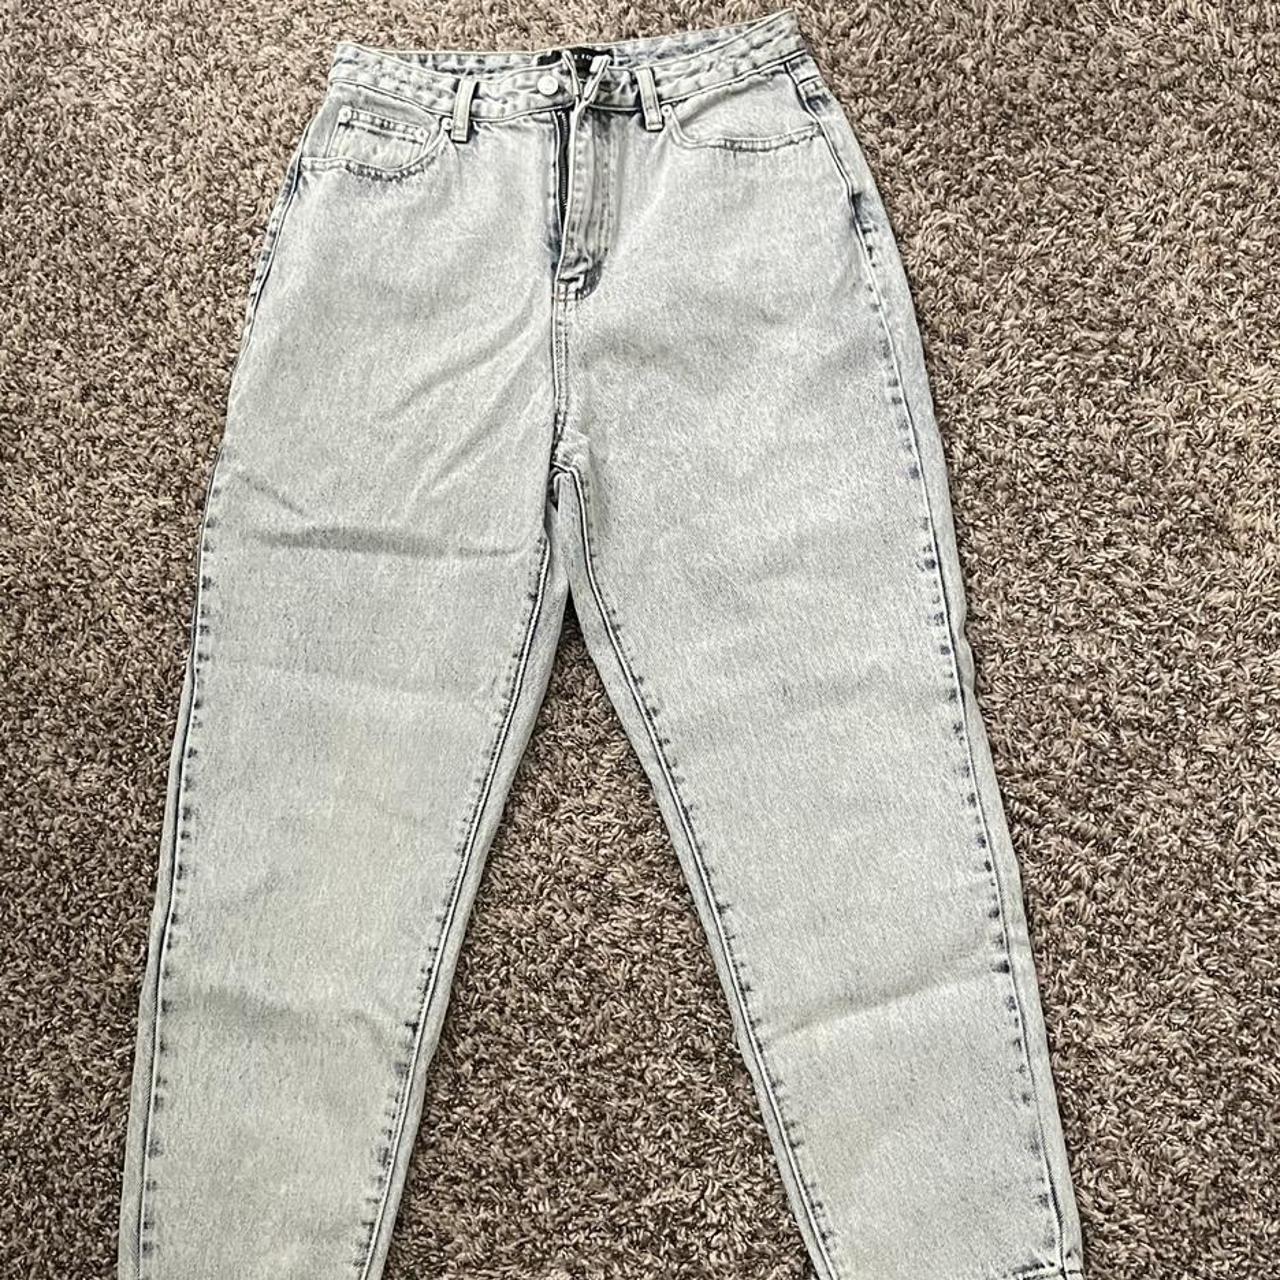 White fox jeans, brand new with tags - Depop